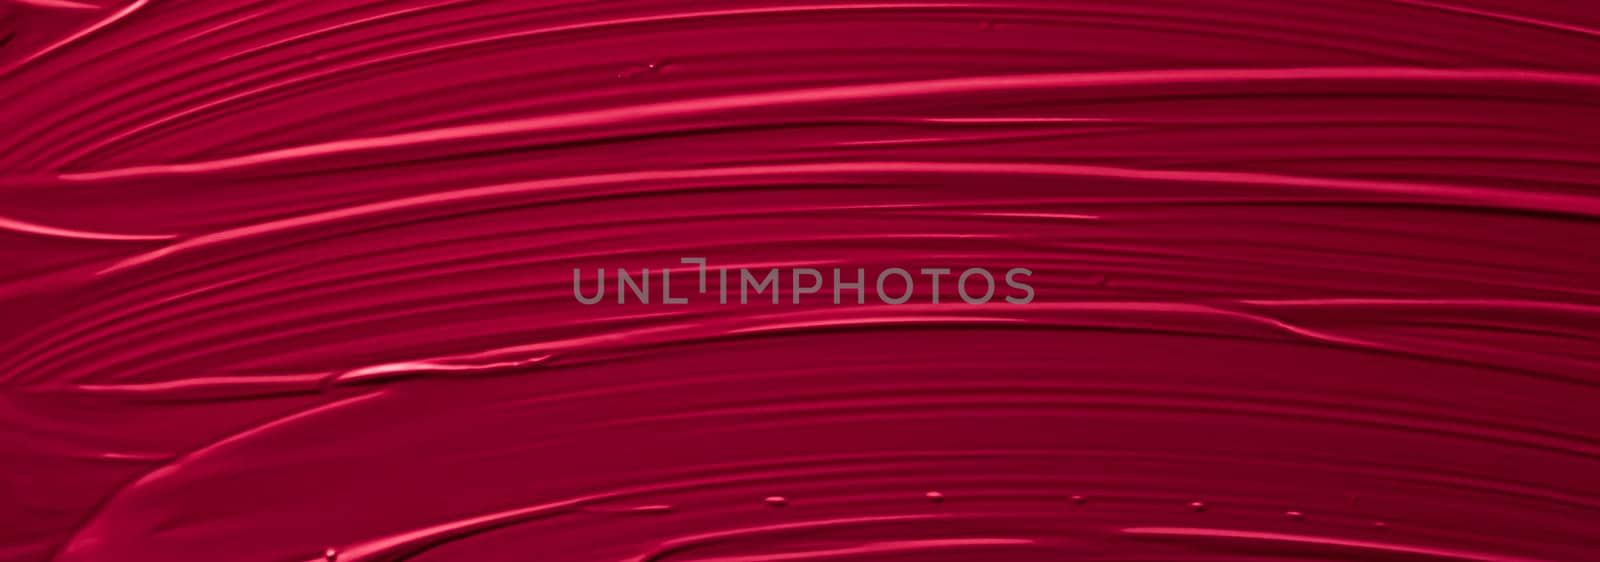 Red lipstick or lip gloss texture as cosmetic background, makeup and beauty cosmetics product for luxury brand, holiday flatlay backdrop or abstract wall art and paint strokes by Anneleven